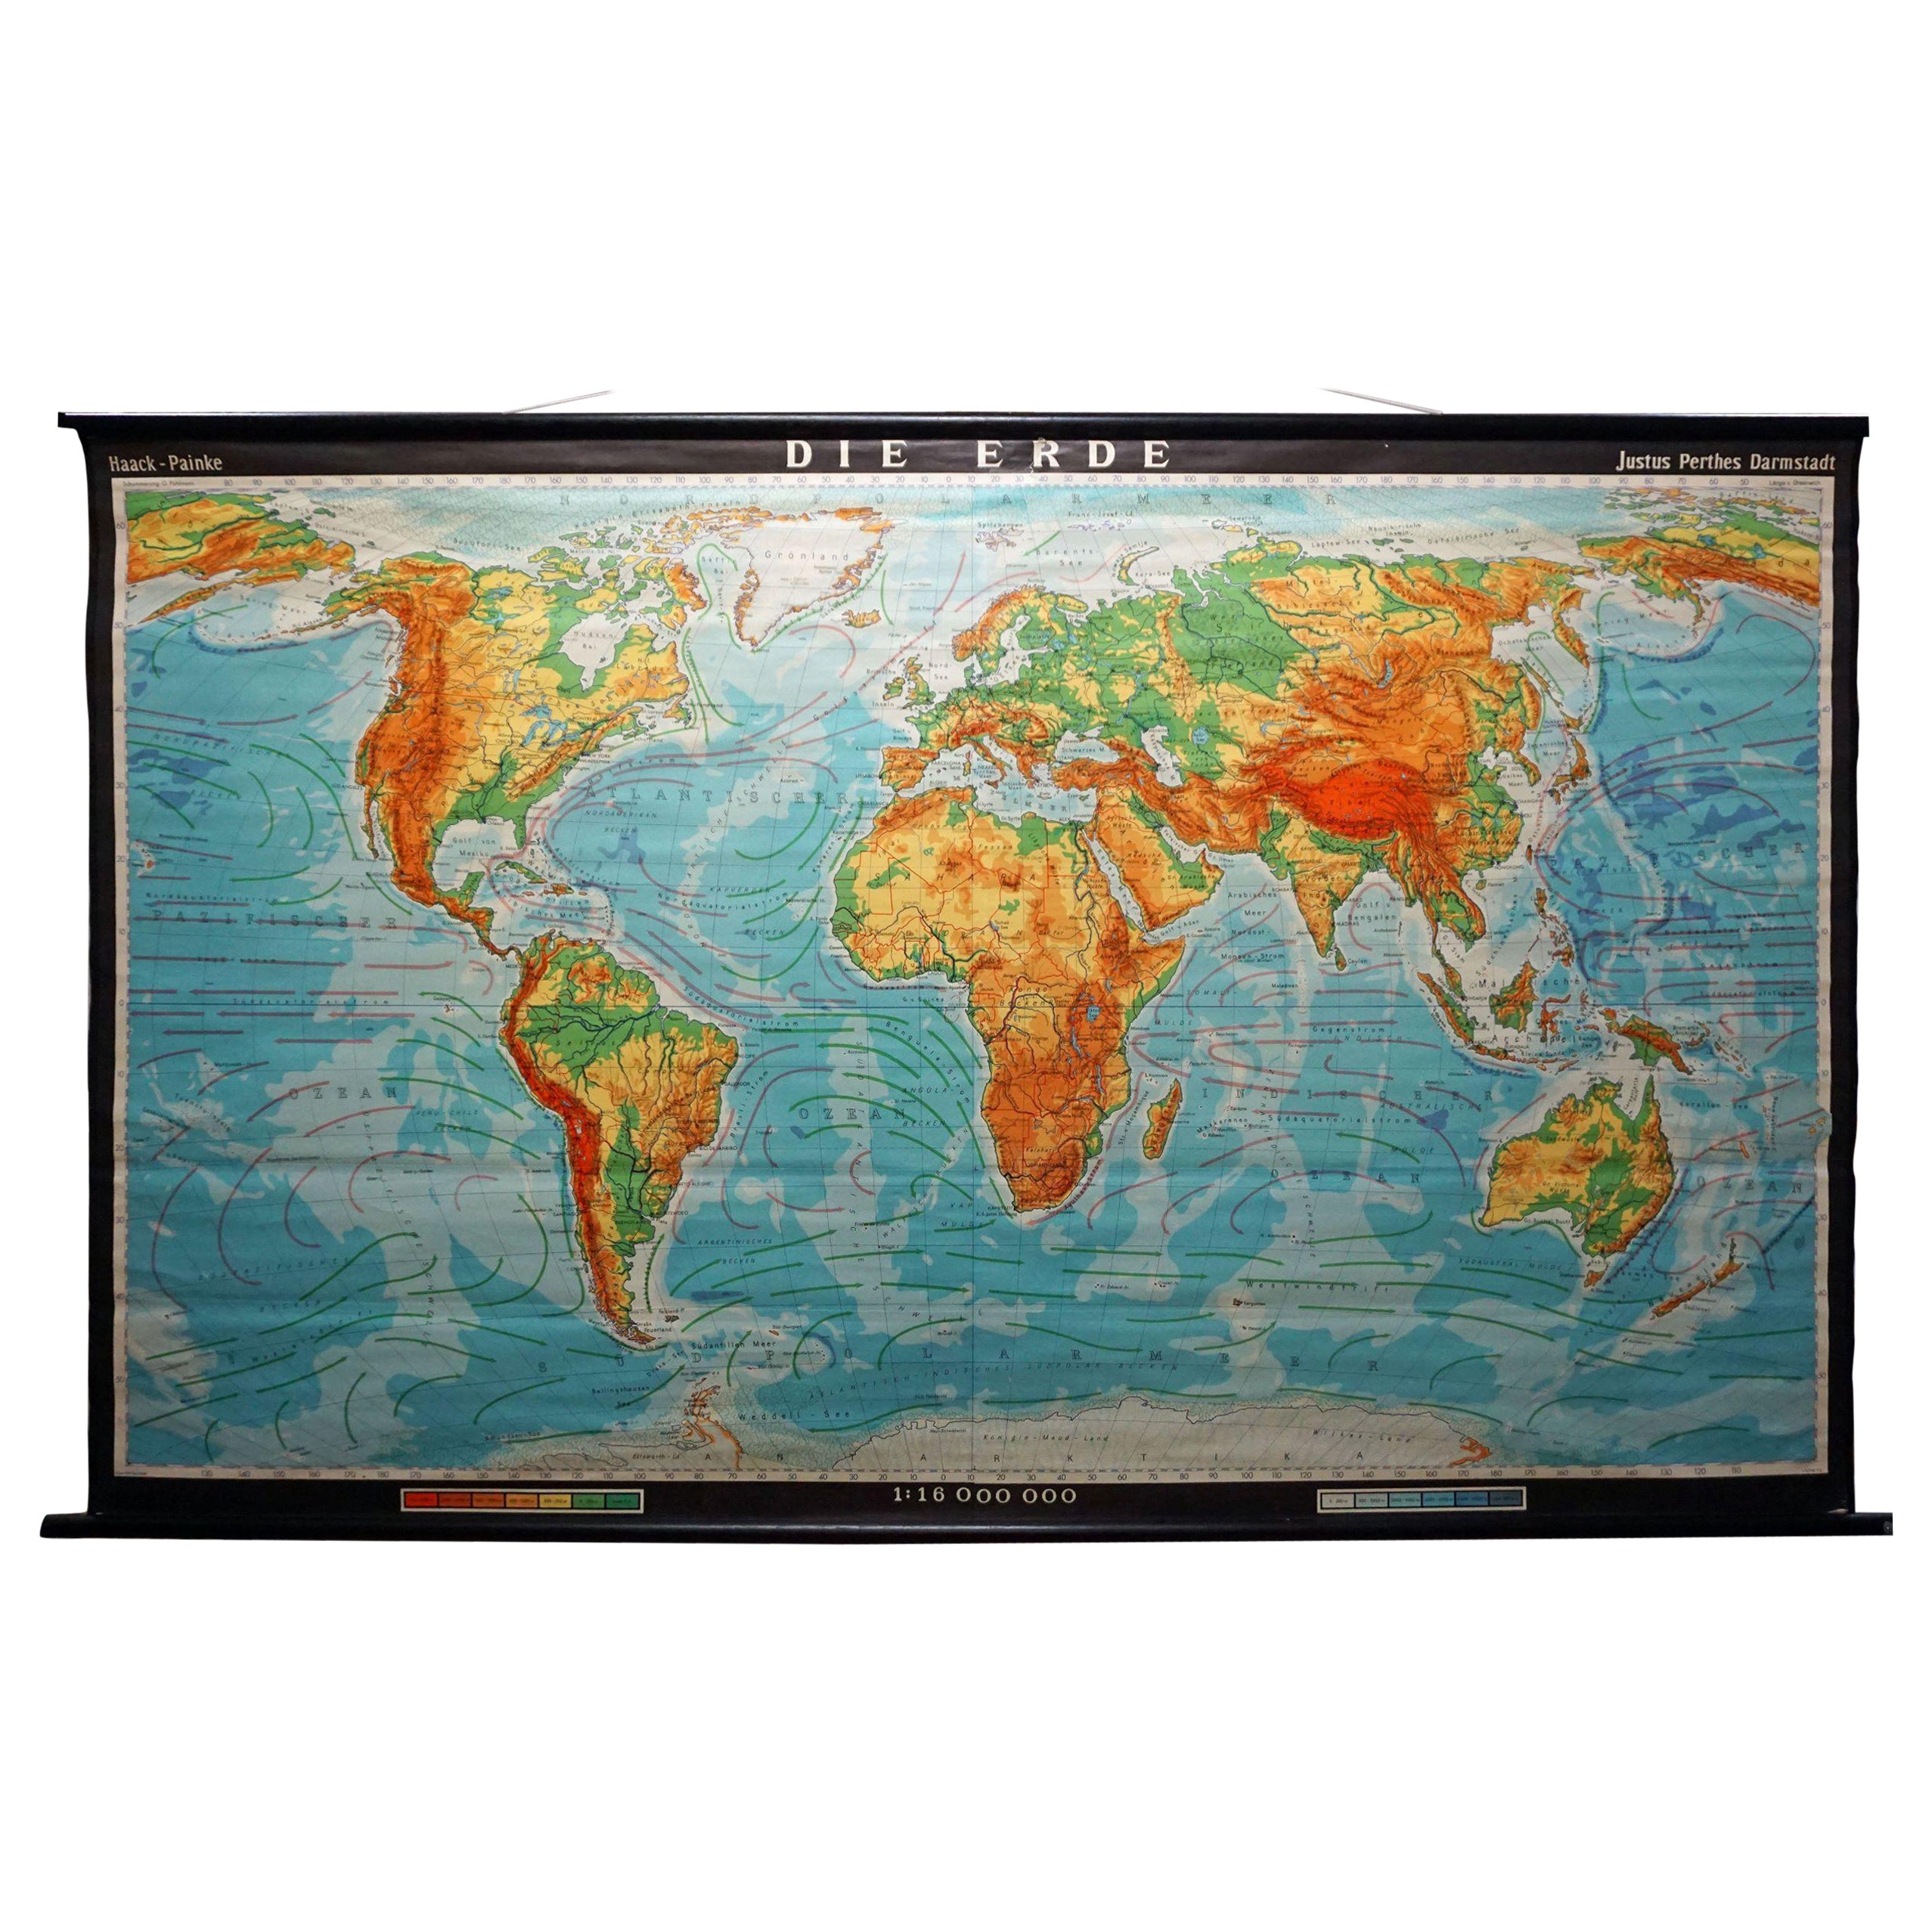 Vintage Mural World Map Earth Poster Pull-Down Wall Chart Poster Print For Sale